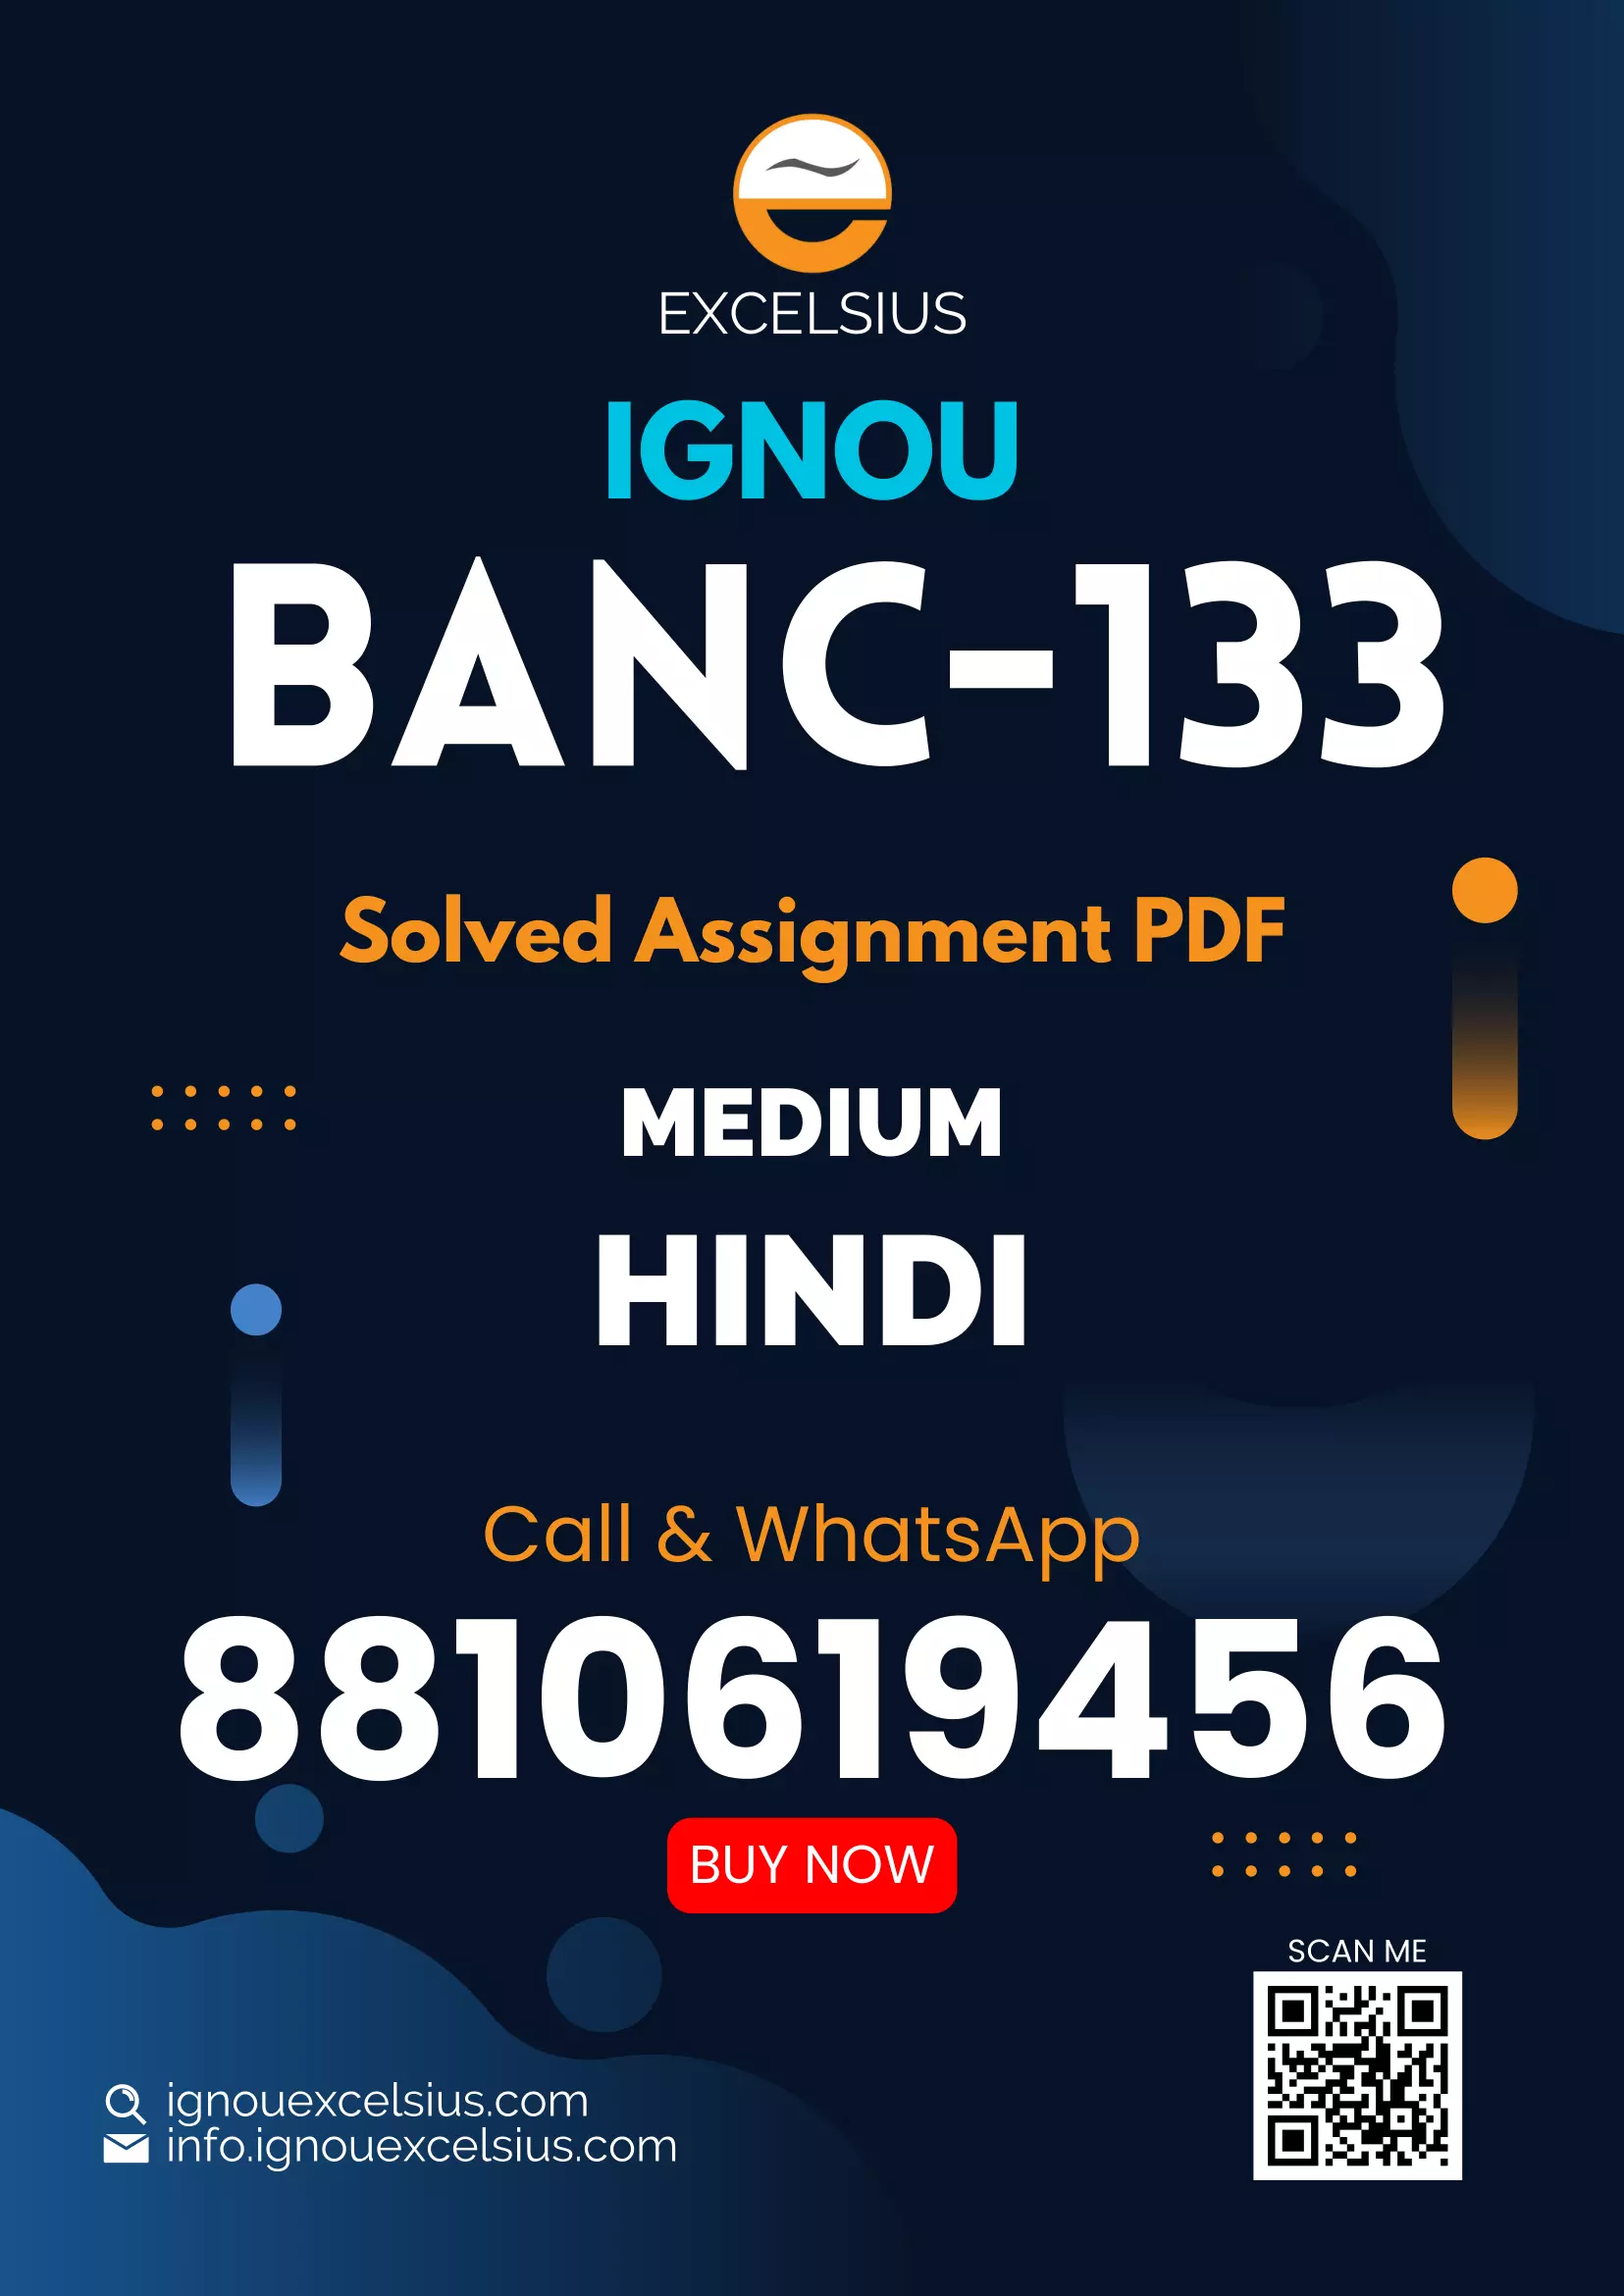 IGNOU BANC-133 - Fundamentals of Social and Cultural Anthropology, Latest Solved Assignment-July 2022 – January 2023